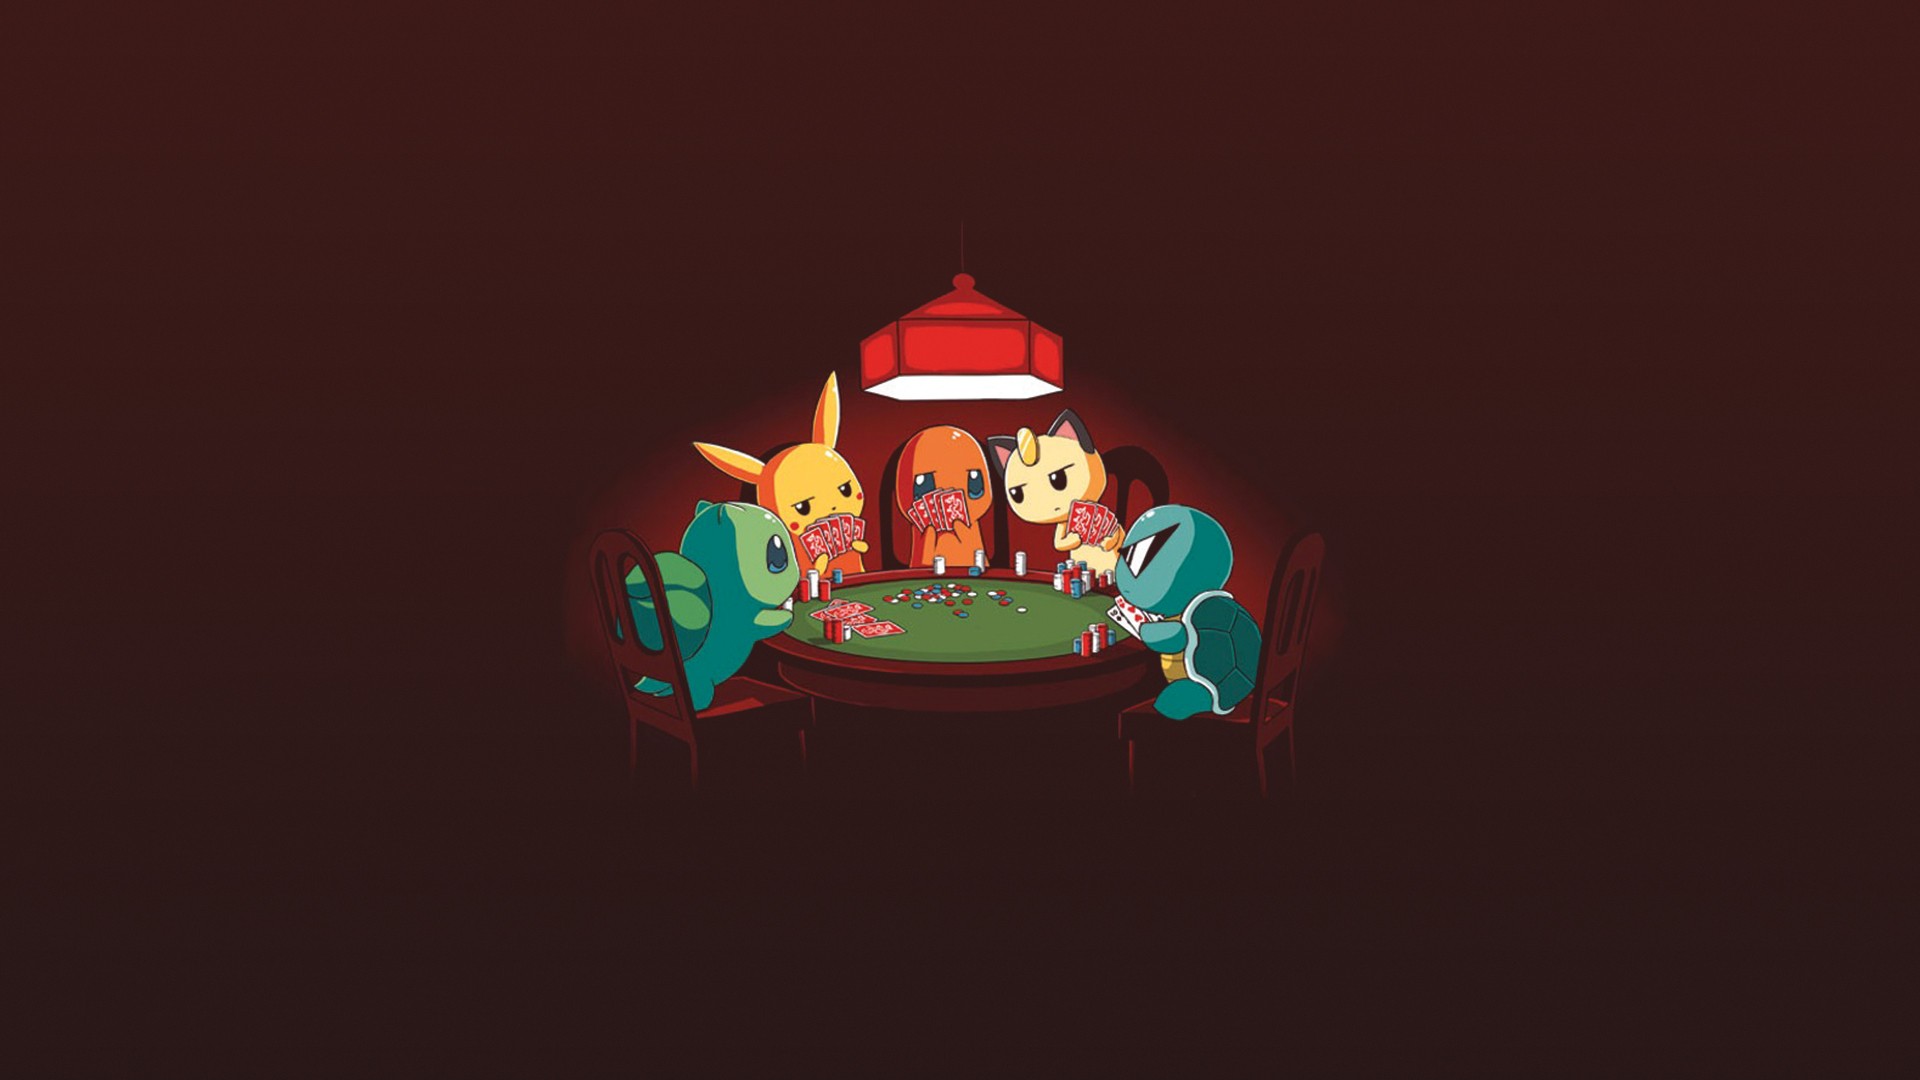 Anime 1920x1080 Pokémon poker Bulbasaur Pikachu Meowth Squirtle Charmander anime red background simple background playing cards